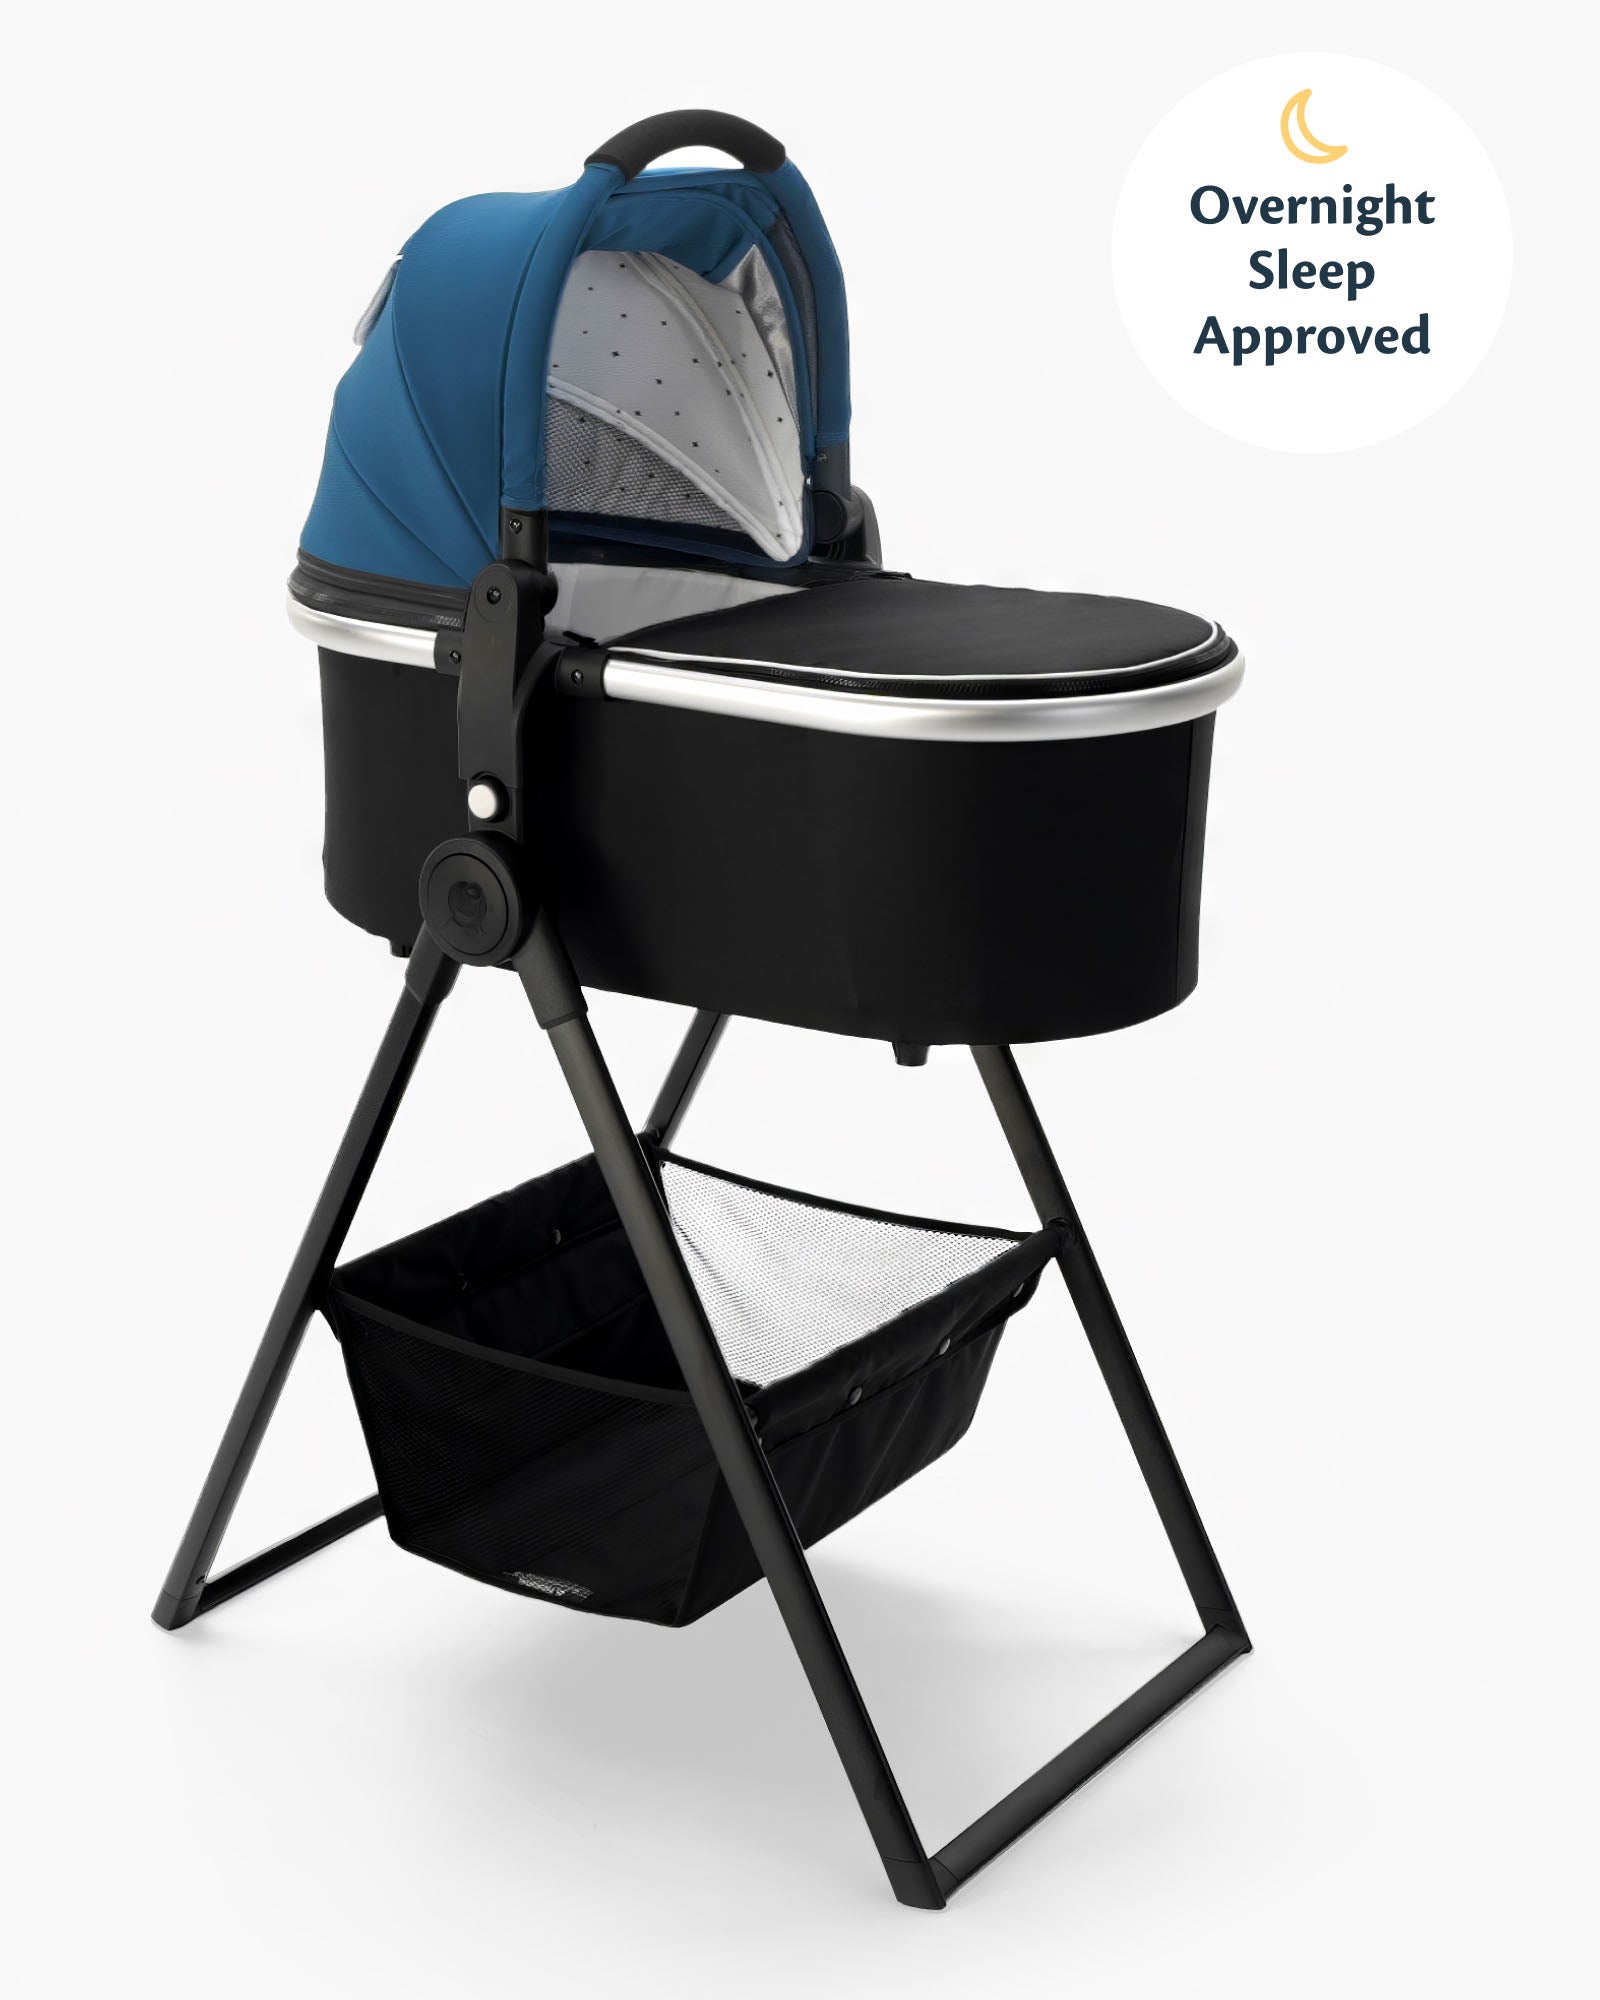 A modern baby bassinet with a blue canopy on a mockingbird-prod bassinet stand, featuring a storage basket underneath and labeled as "overnight sleep approved. #color_sea